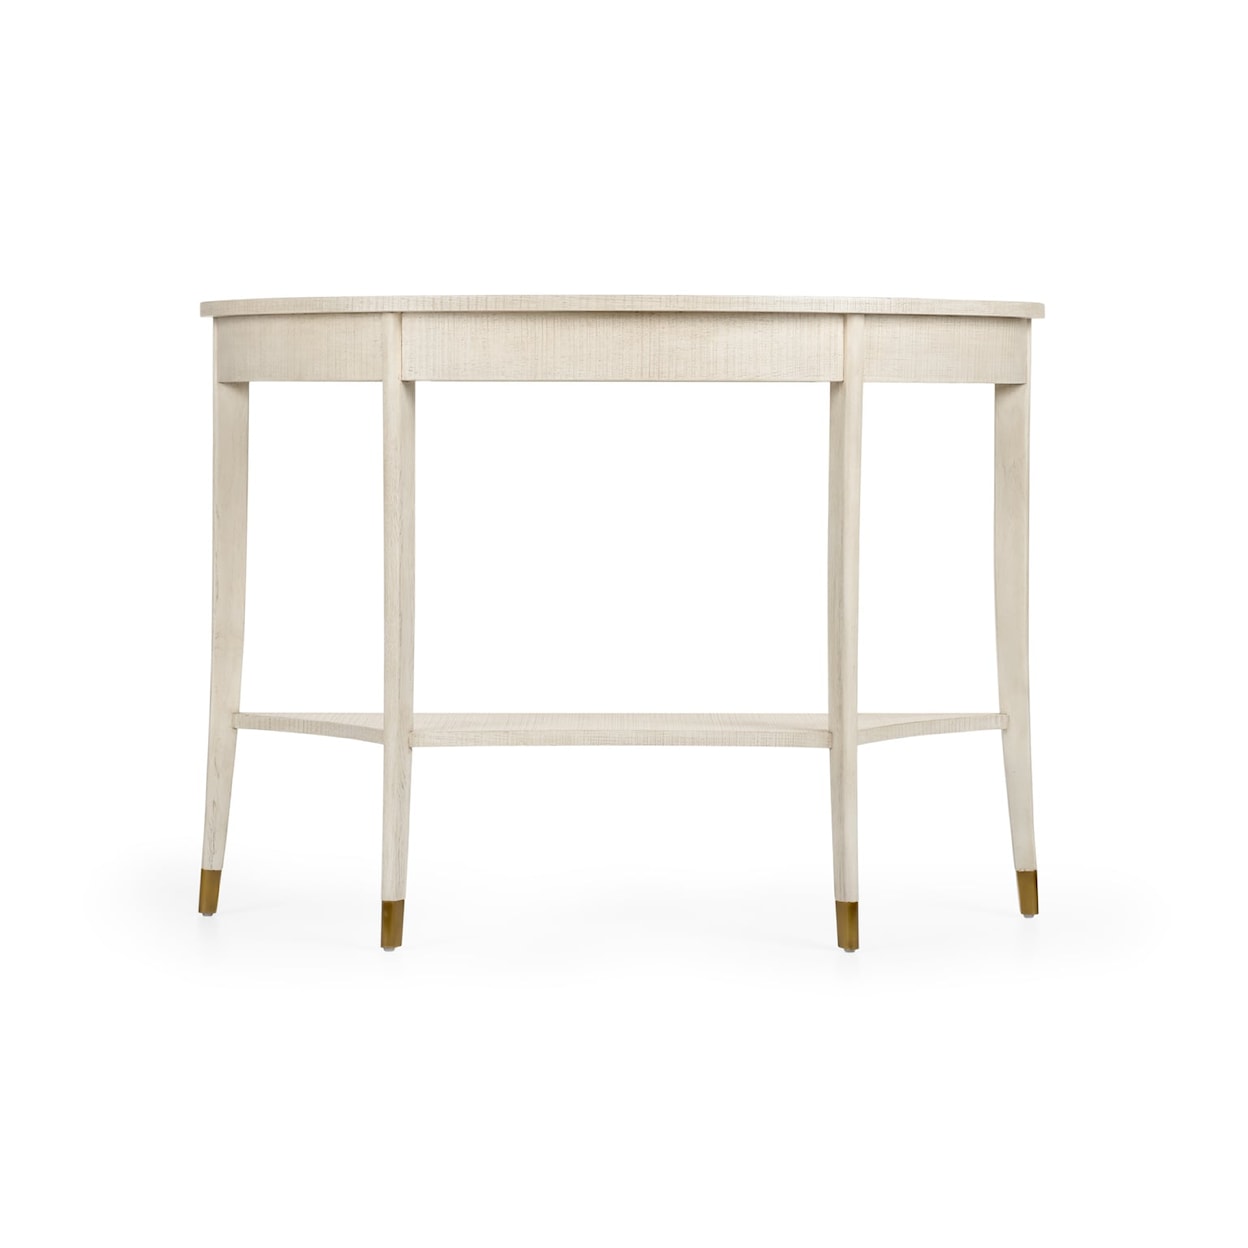 Wildwood Lamps Tables- Console OAKLEE DEMILUNE